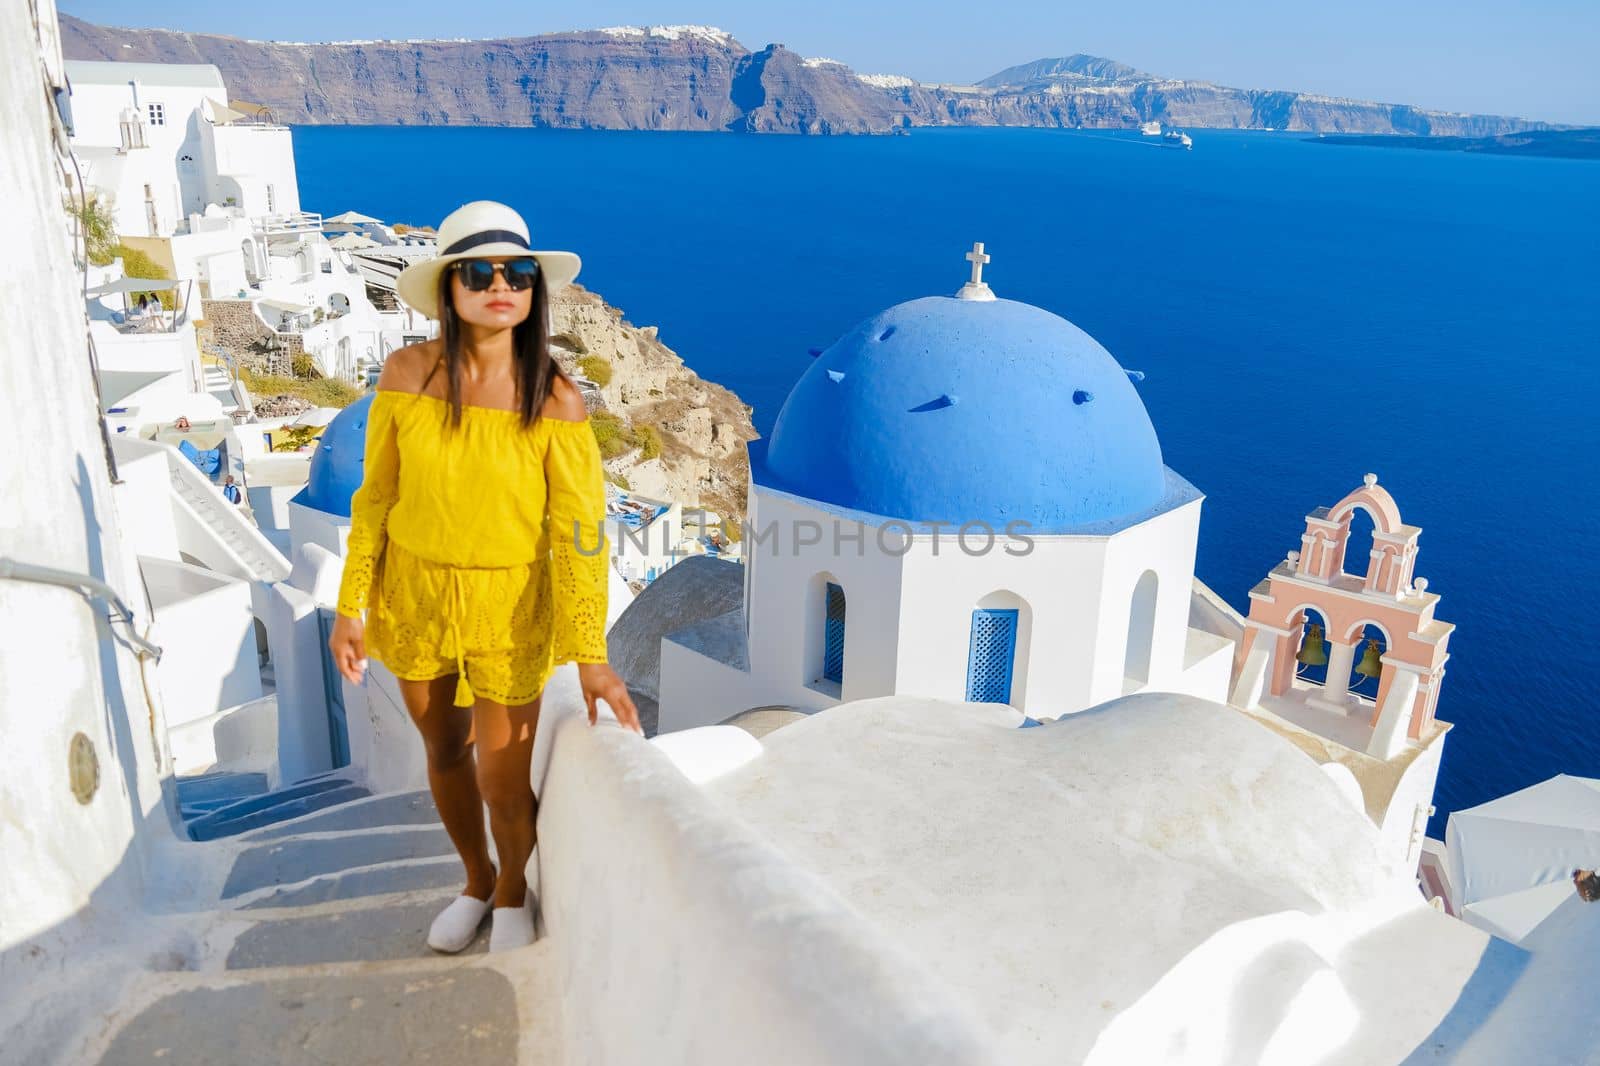 Asian women visit Oia Santorini Greece during summer with whitewashed homes and churches by fokkebok